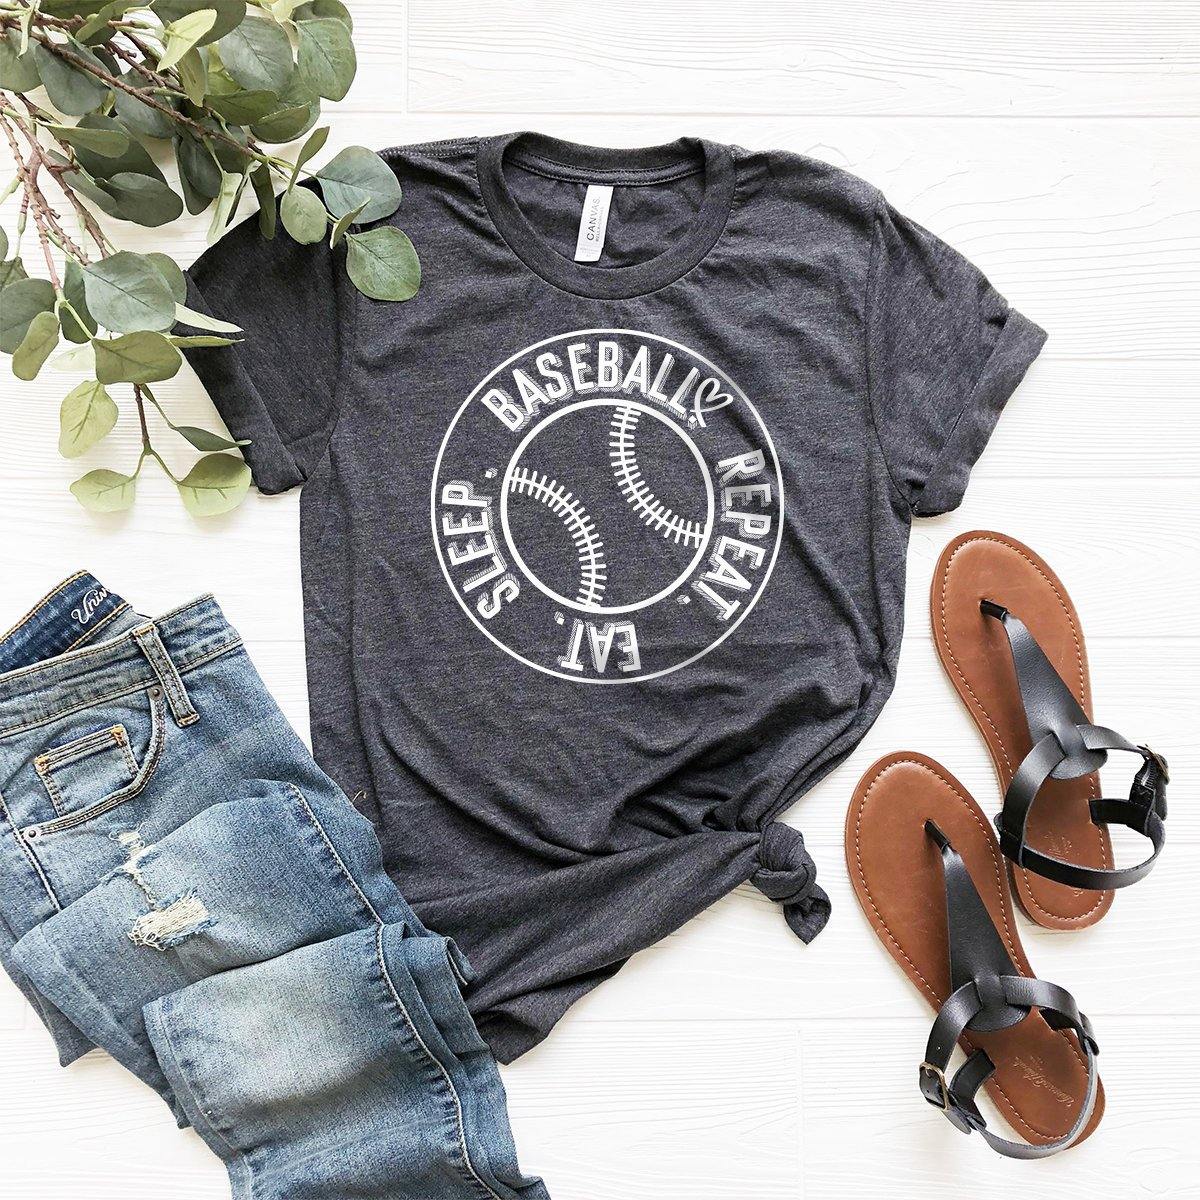 Baseball shirt  Baseball style shirt, Baseball shirt outfit